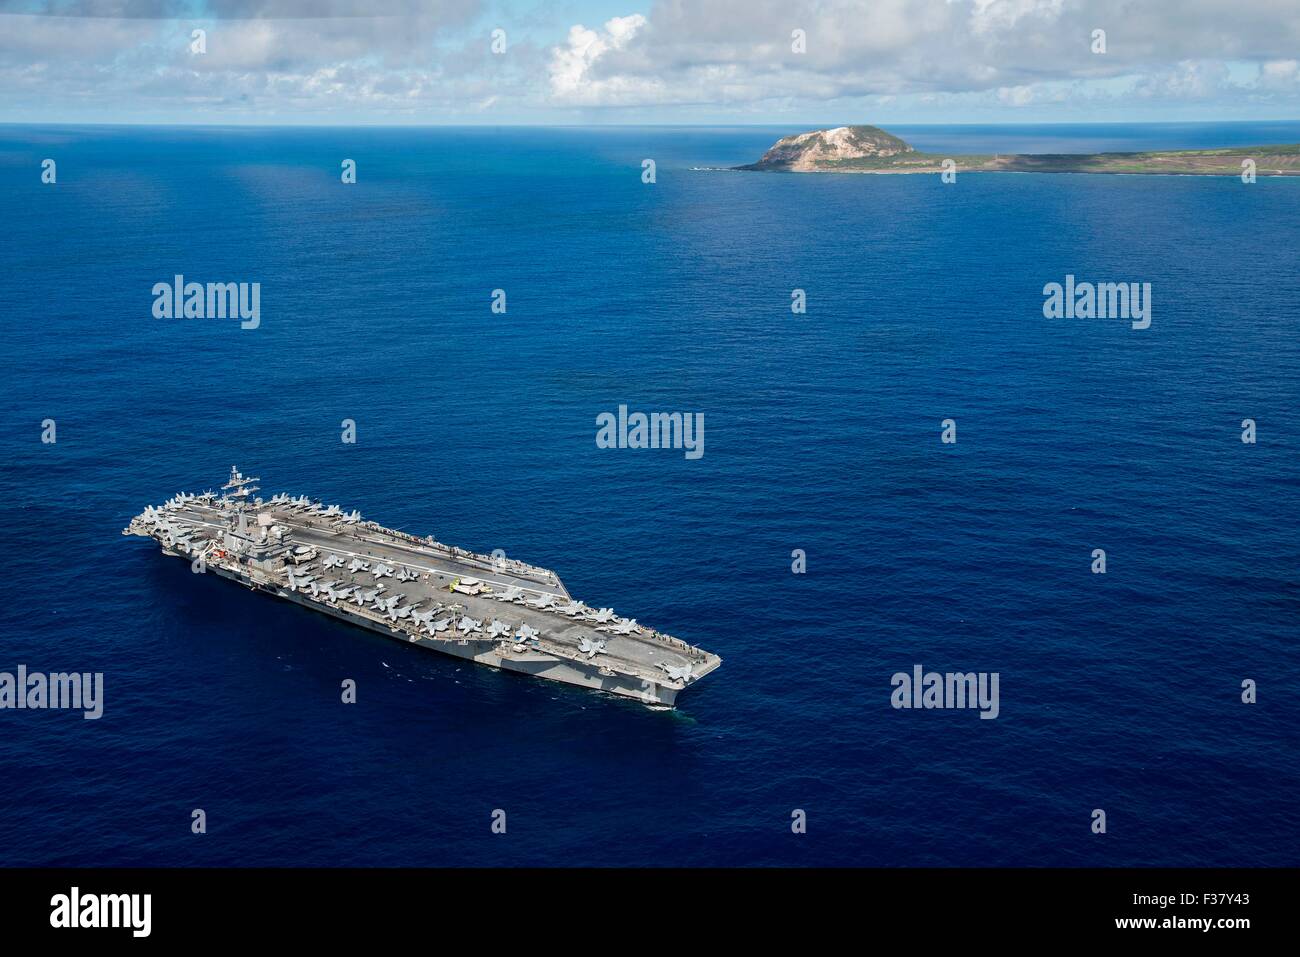 US Navy Nimitz-class nuclear aircraft carrier USS Ronald Reagan pauses to honor fallen service members from  the Battle of Iwo Jima while underway off the island of Iwo To, formerly known as Iwo Jima September 29, 2015 in the Pacific Ocean.  This year marks the 70th anniversary of the end of World War II. Stock Photo